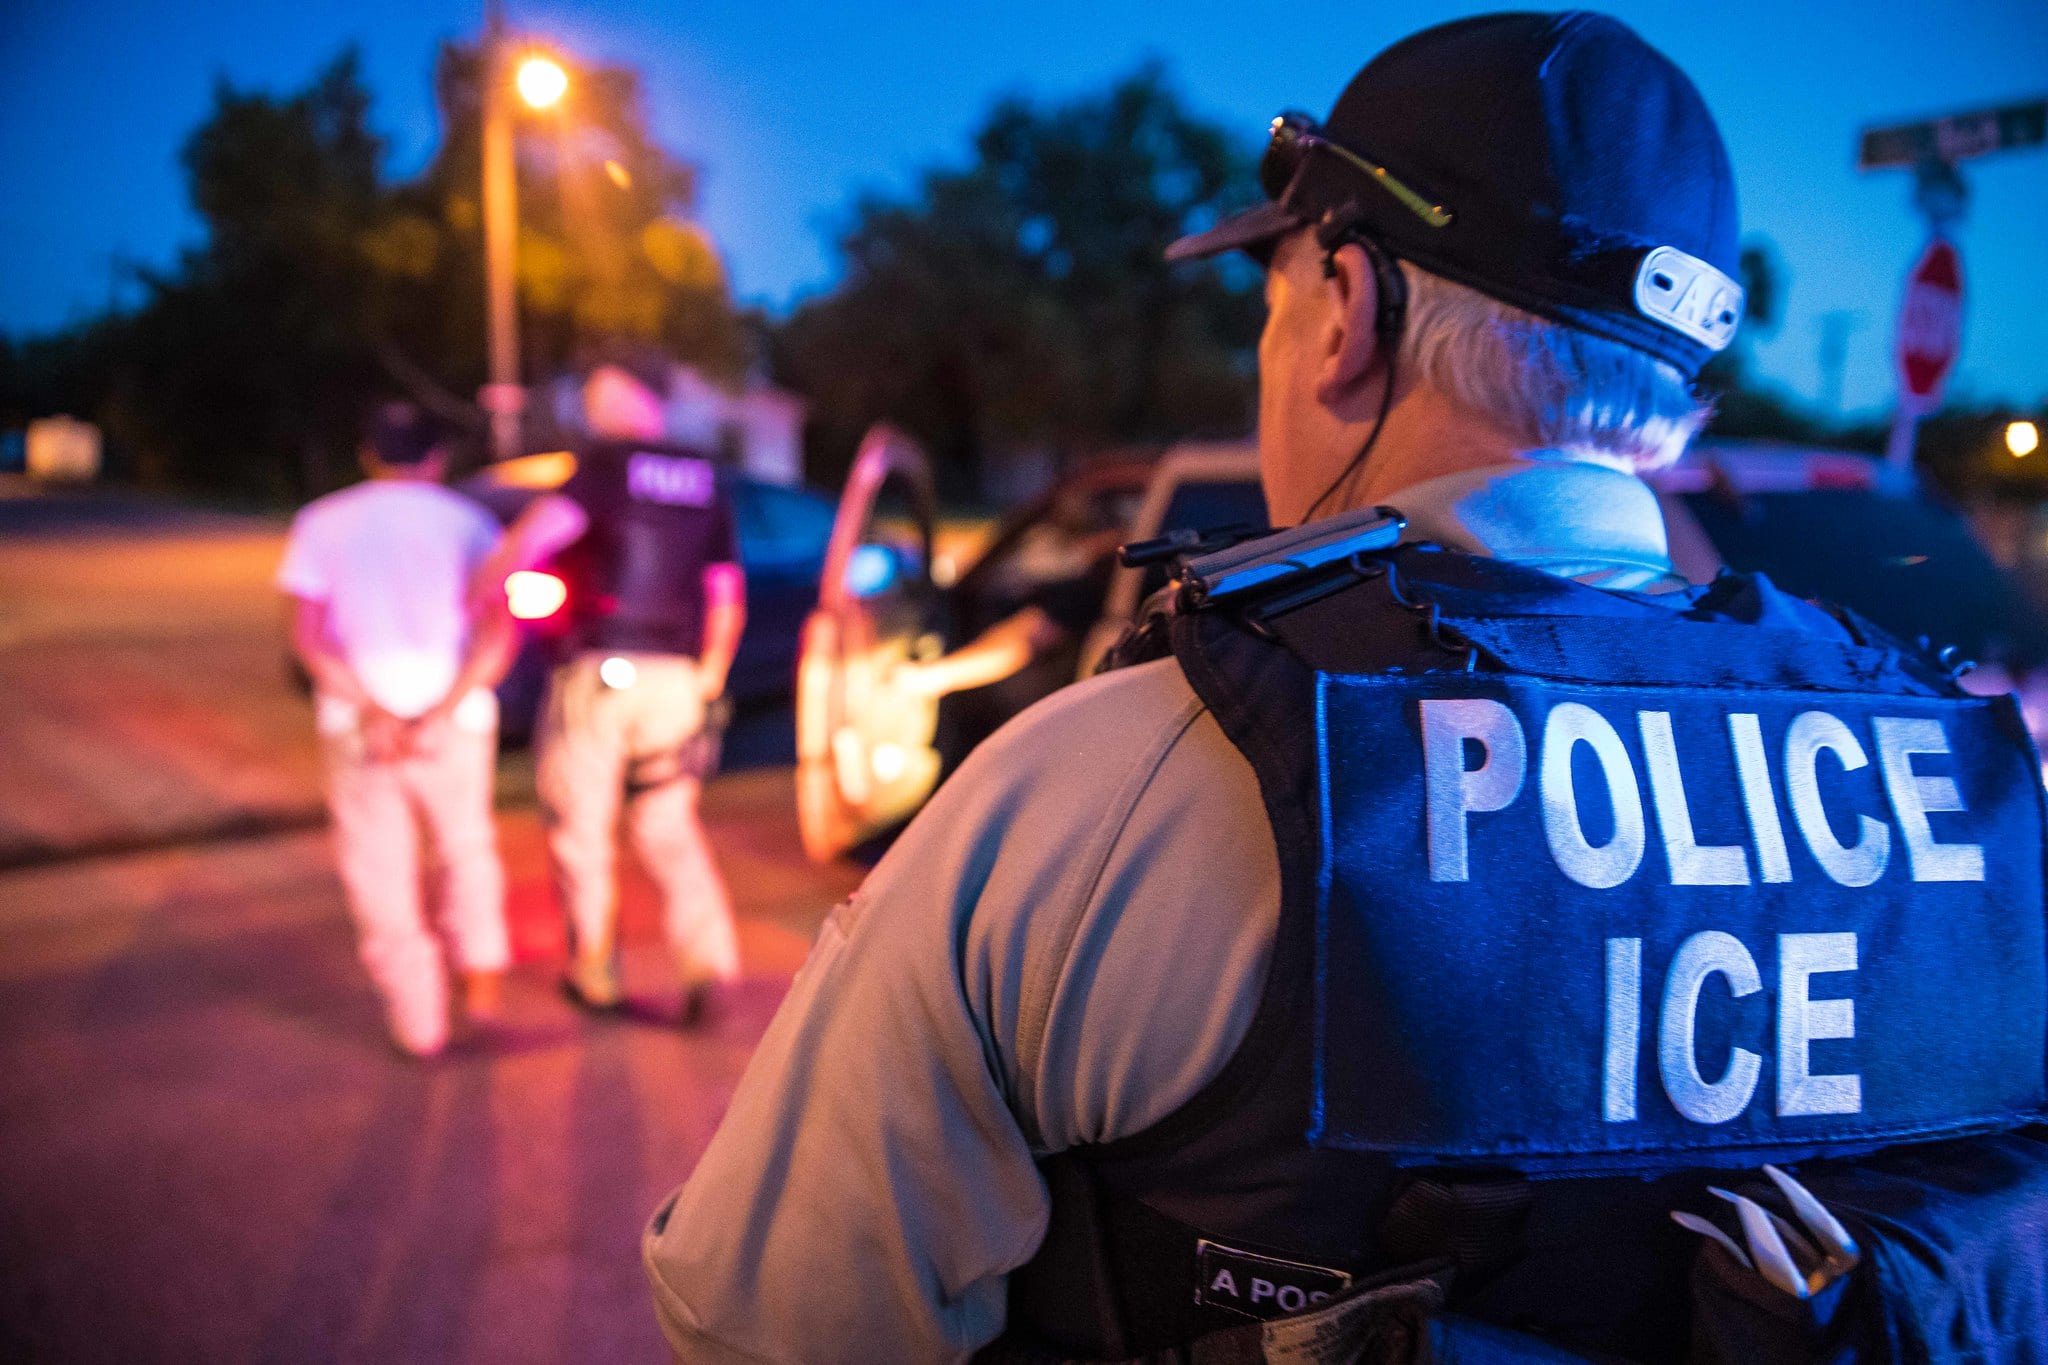 New Directive: ICE to Consider Military Service When Determining Civil Immigration Enforcement